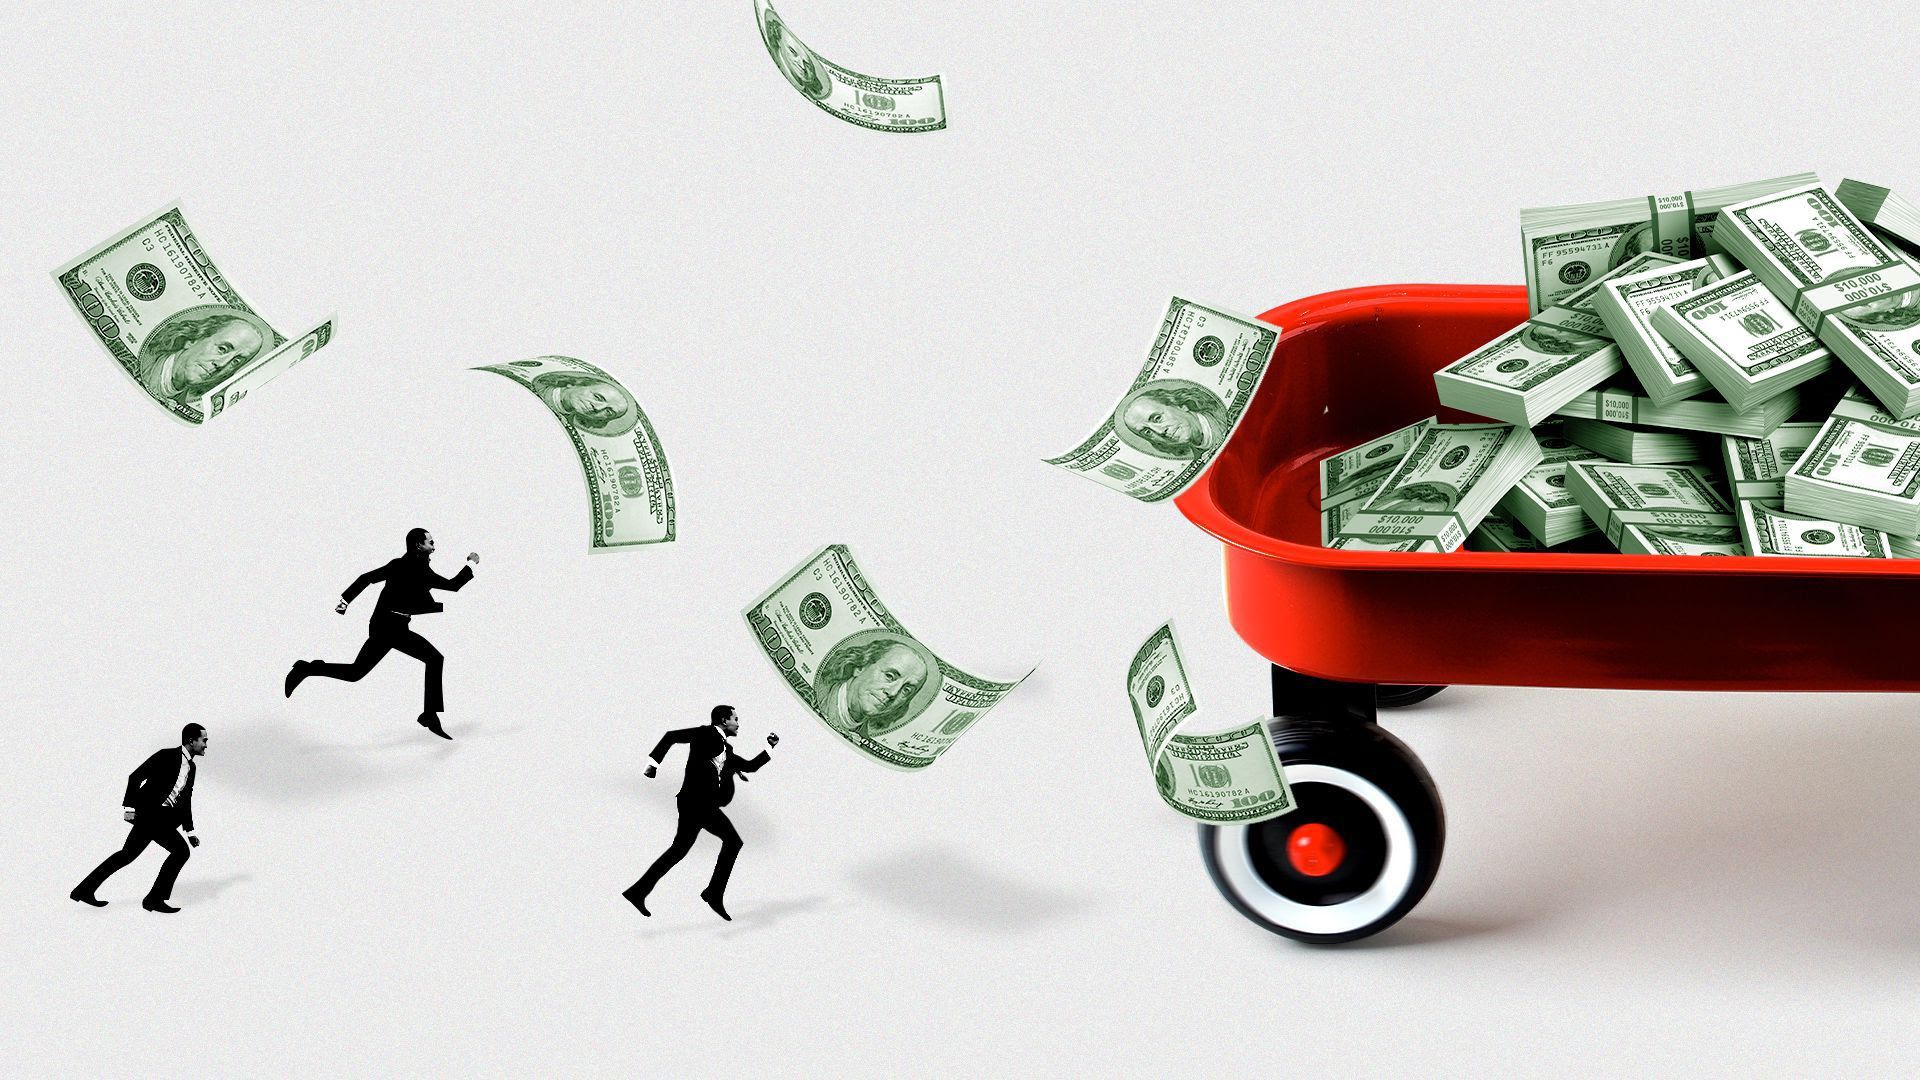 An illustration of people chasing a wagon of money.